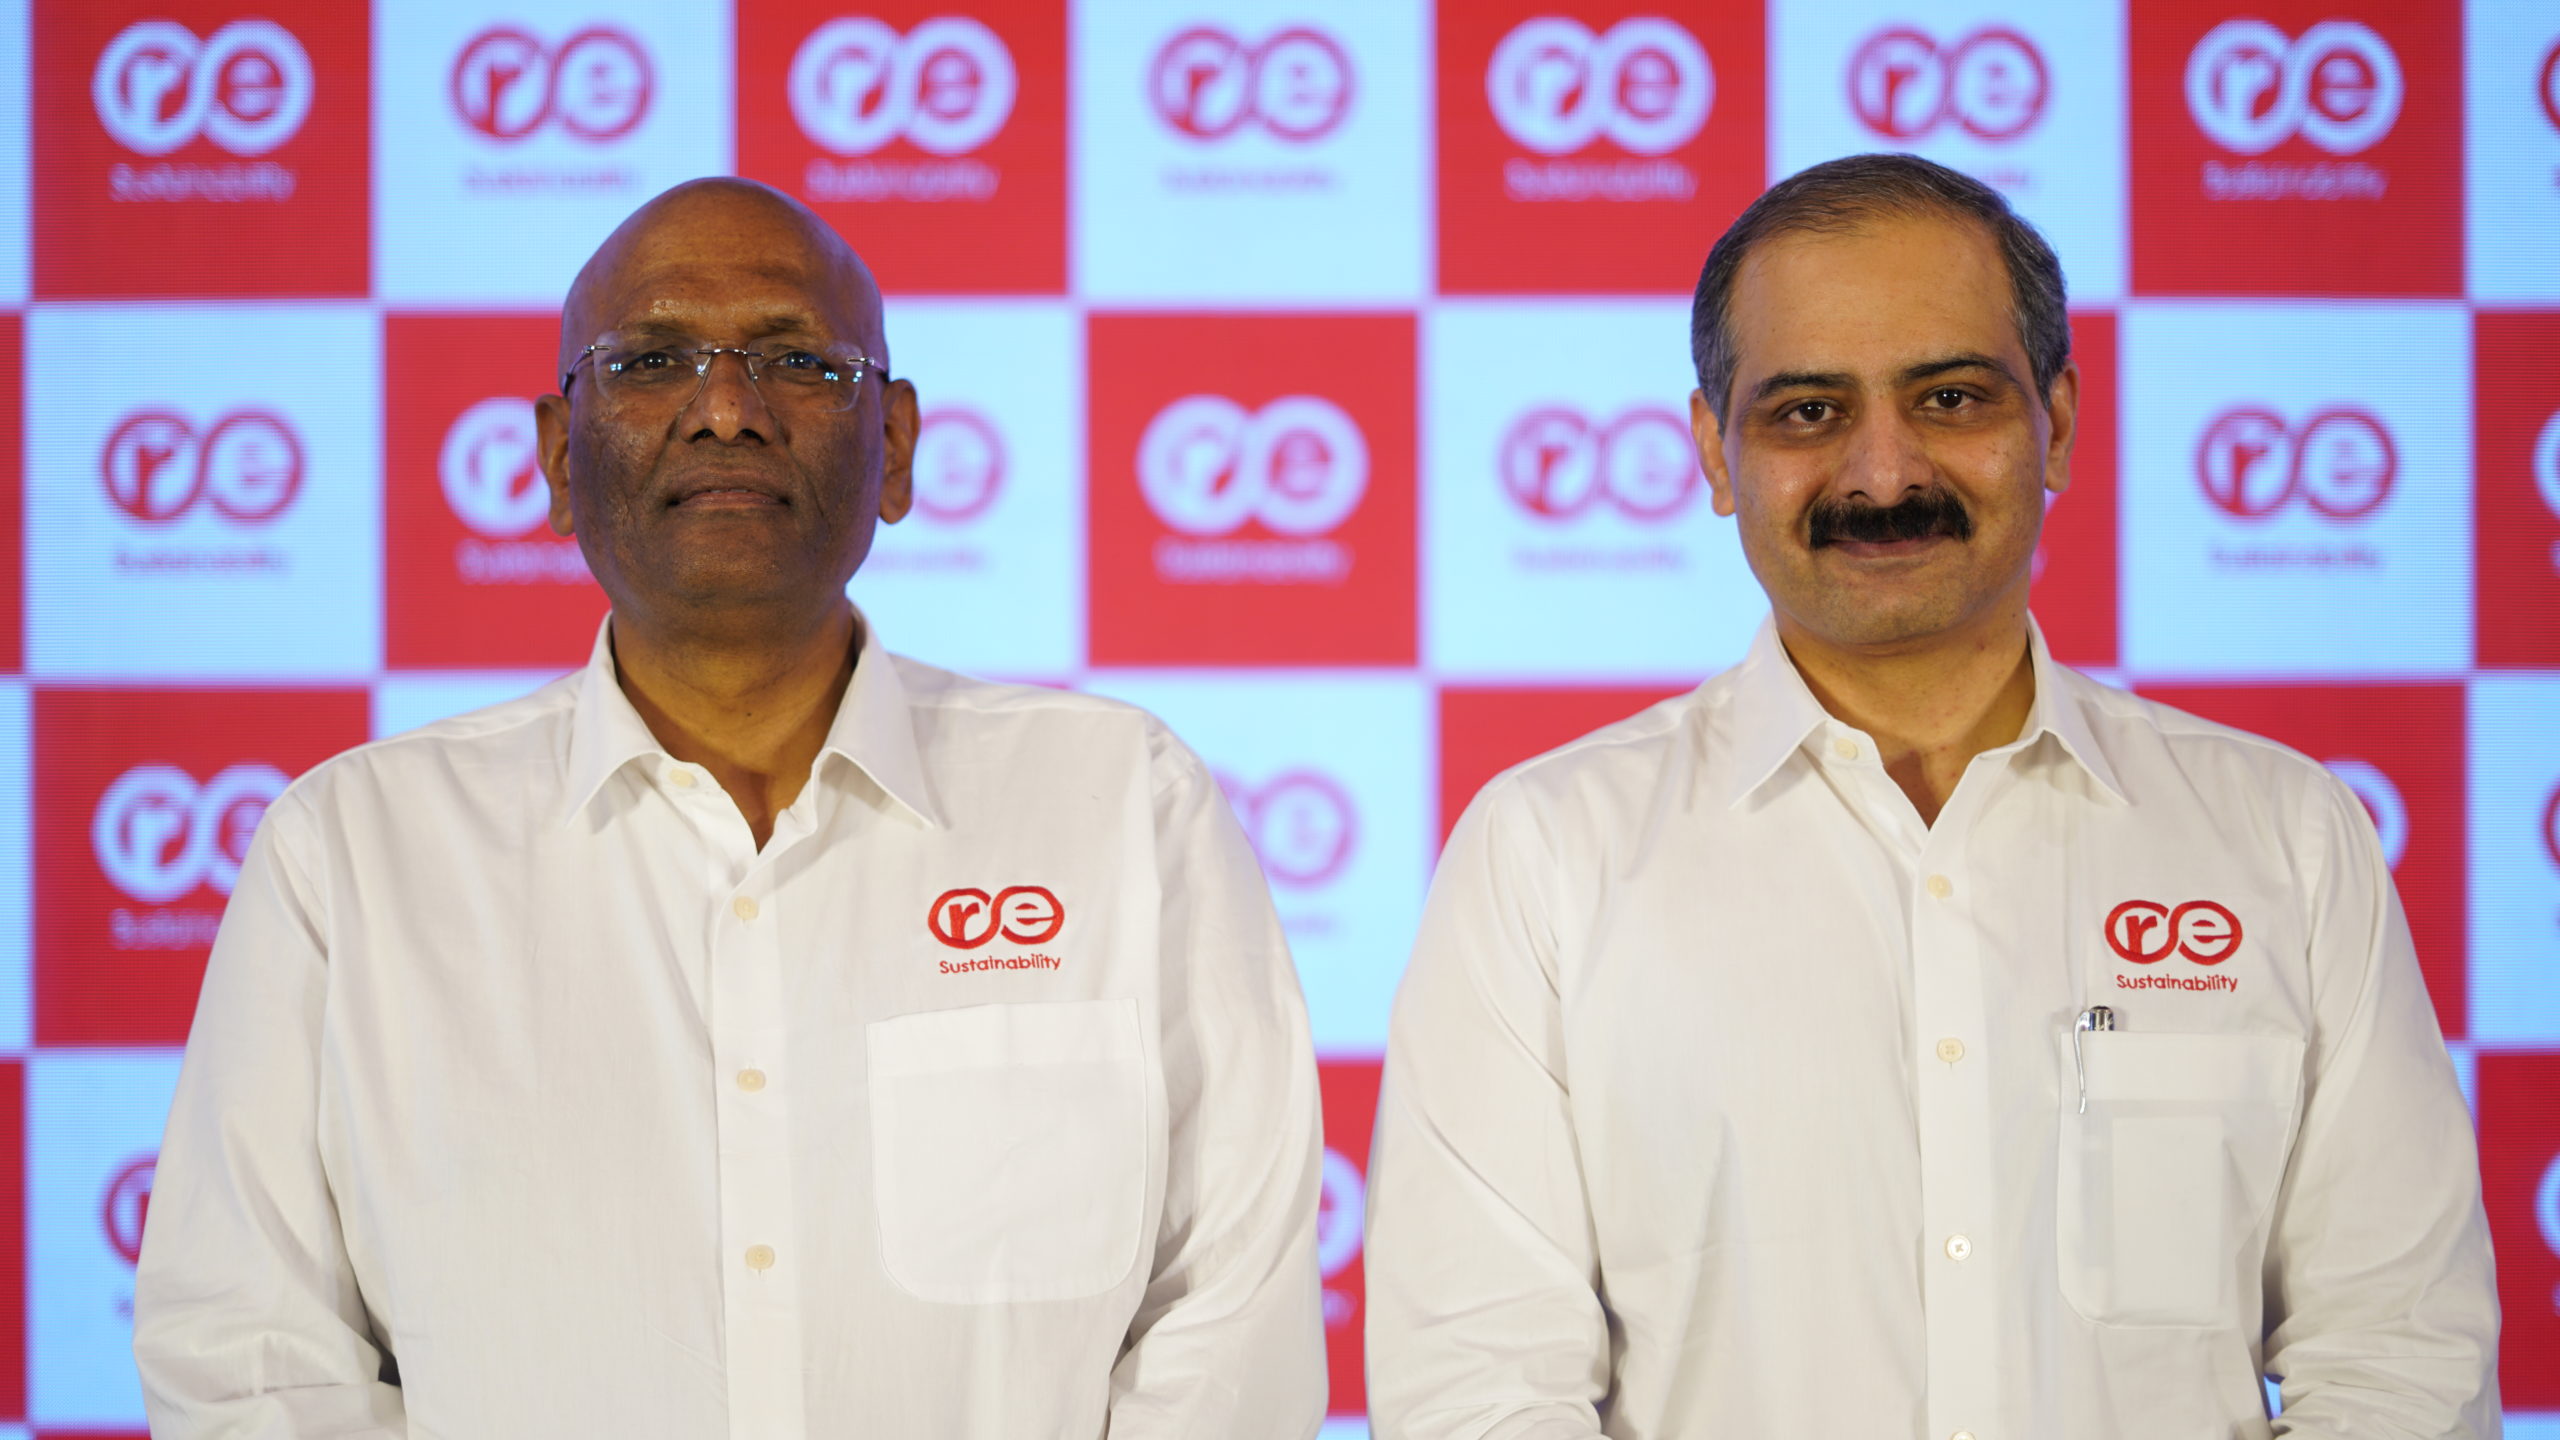 Ramky rebrands itself as Re Sustainability Ltd.